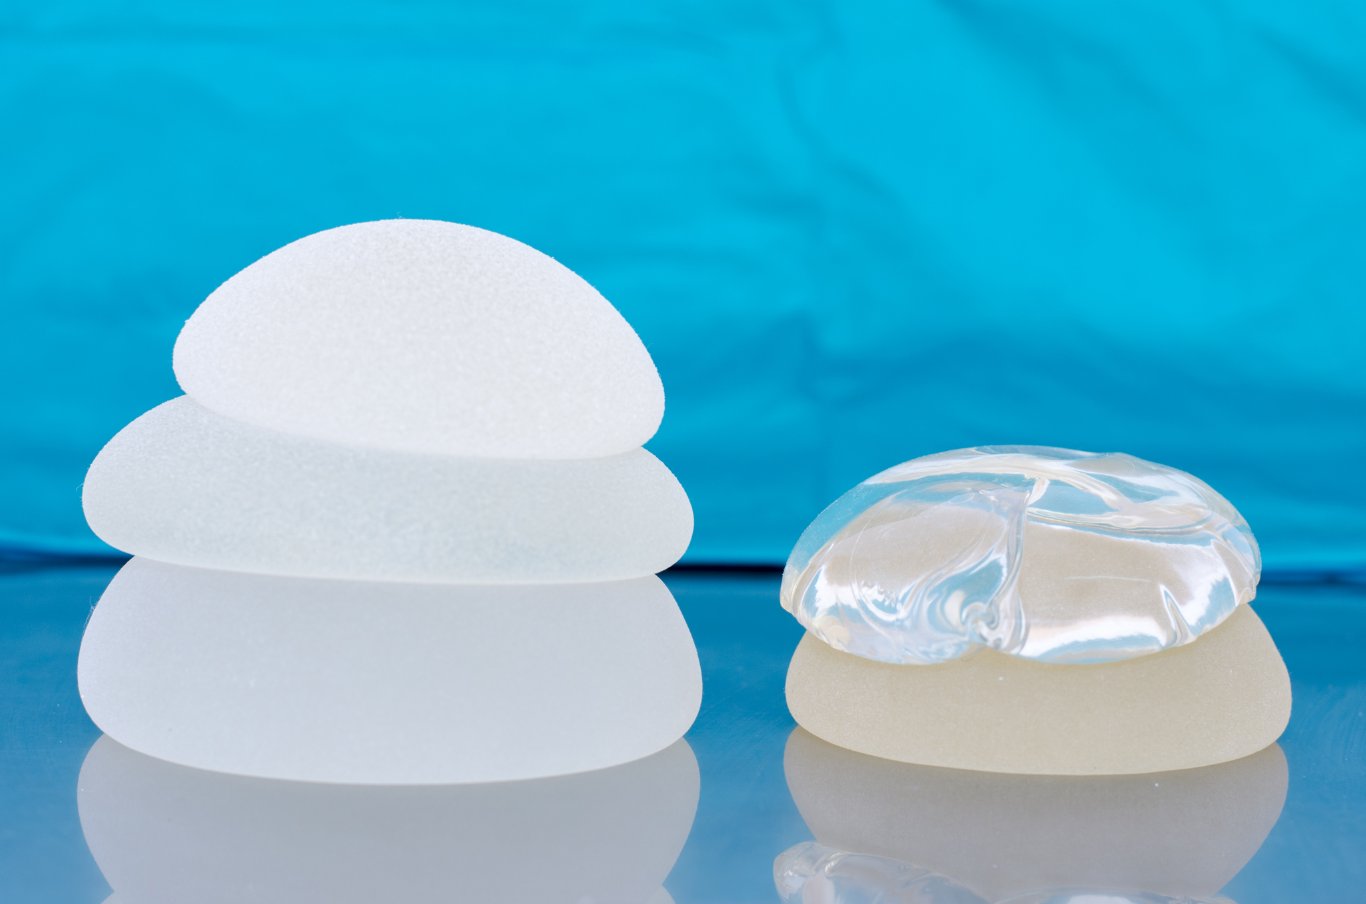 The FDA has approved a new silicone breast implant. To learn about your breast augmentation options, call Denver plastic surgeon Dr. Zwiebel at 303-470-3400